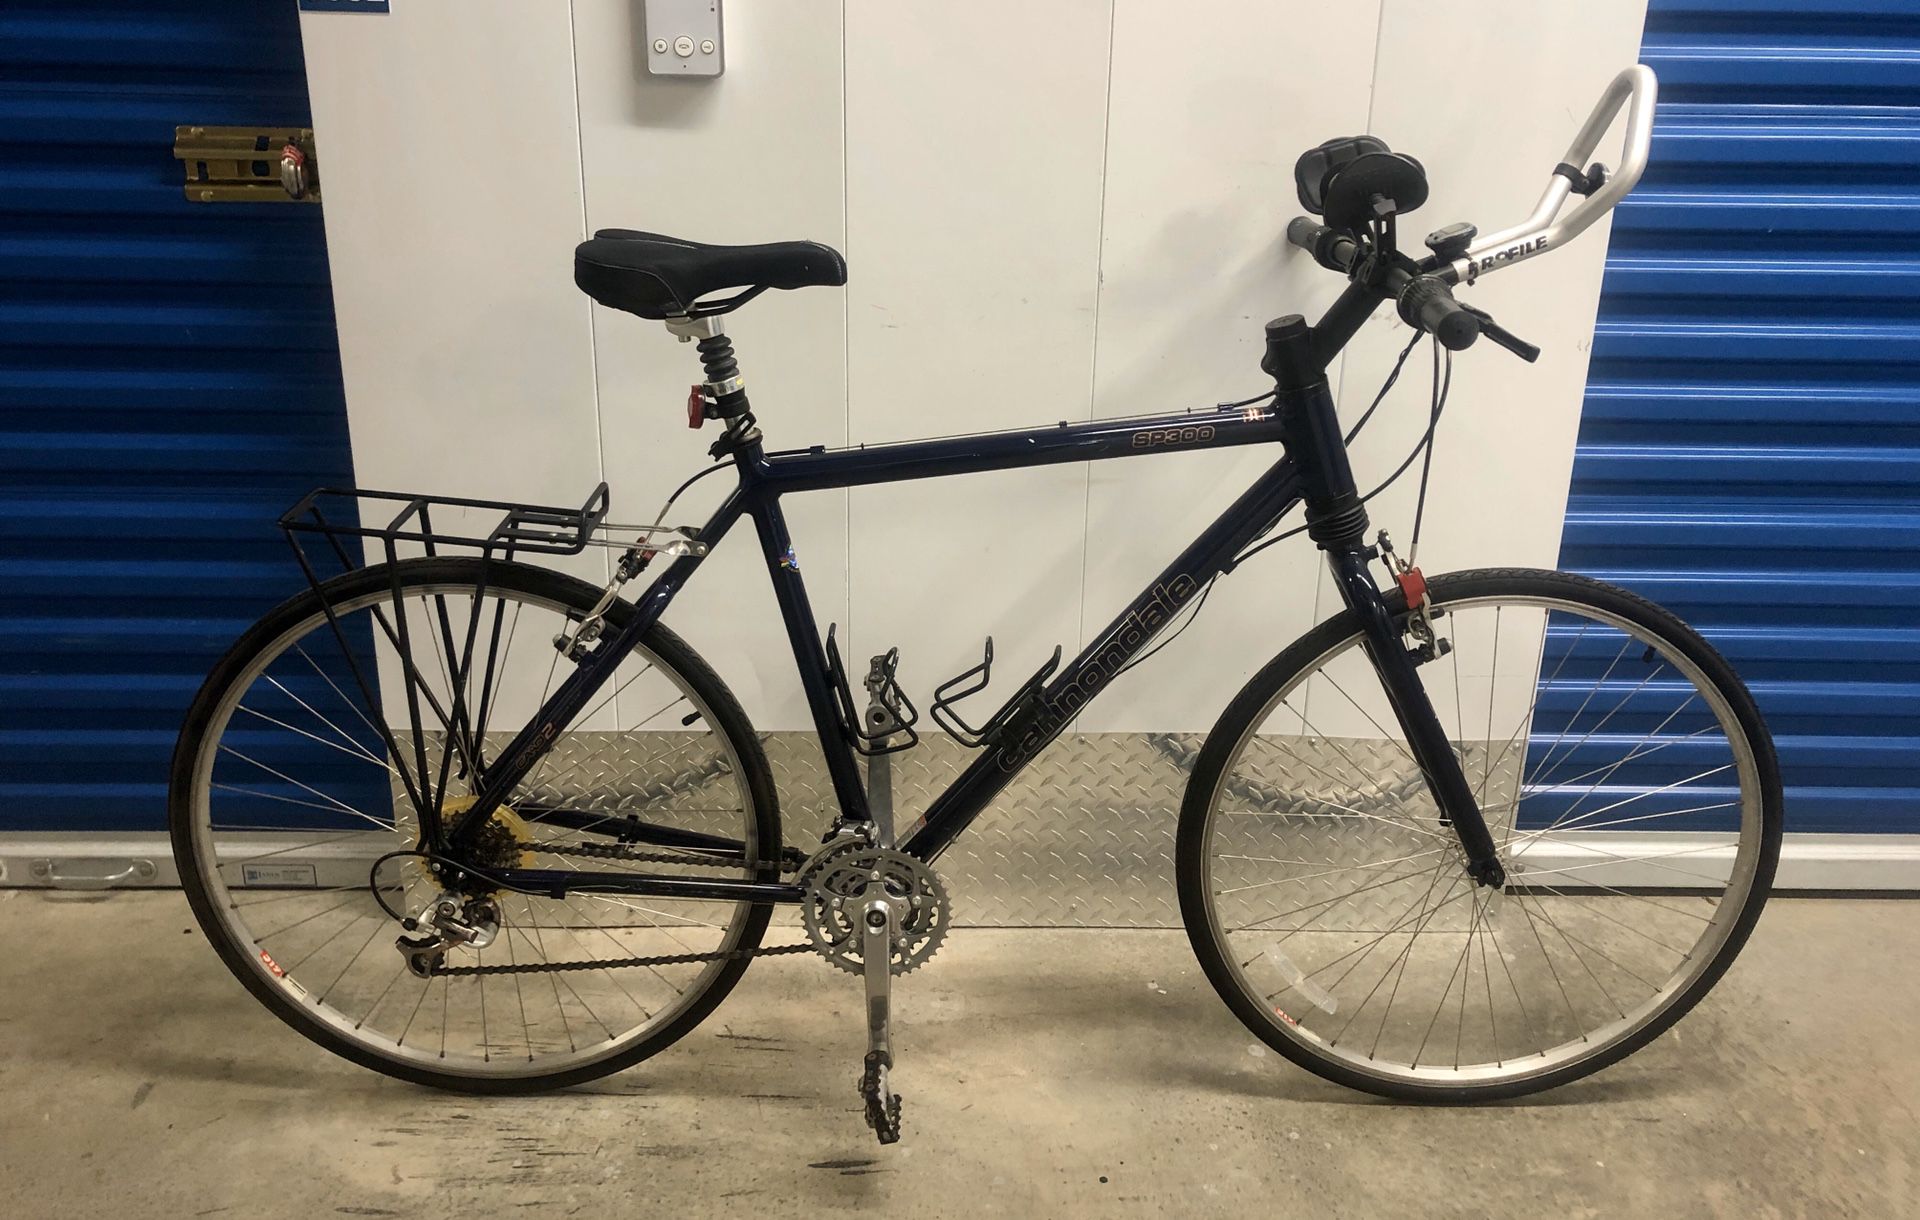 1999 CANNONDALE SILK PATH 300 21-SPEED HYBRID BIKE. EXCELLENT CONDITION!